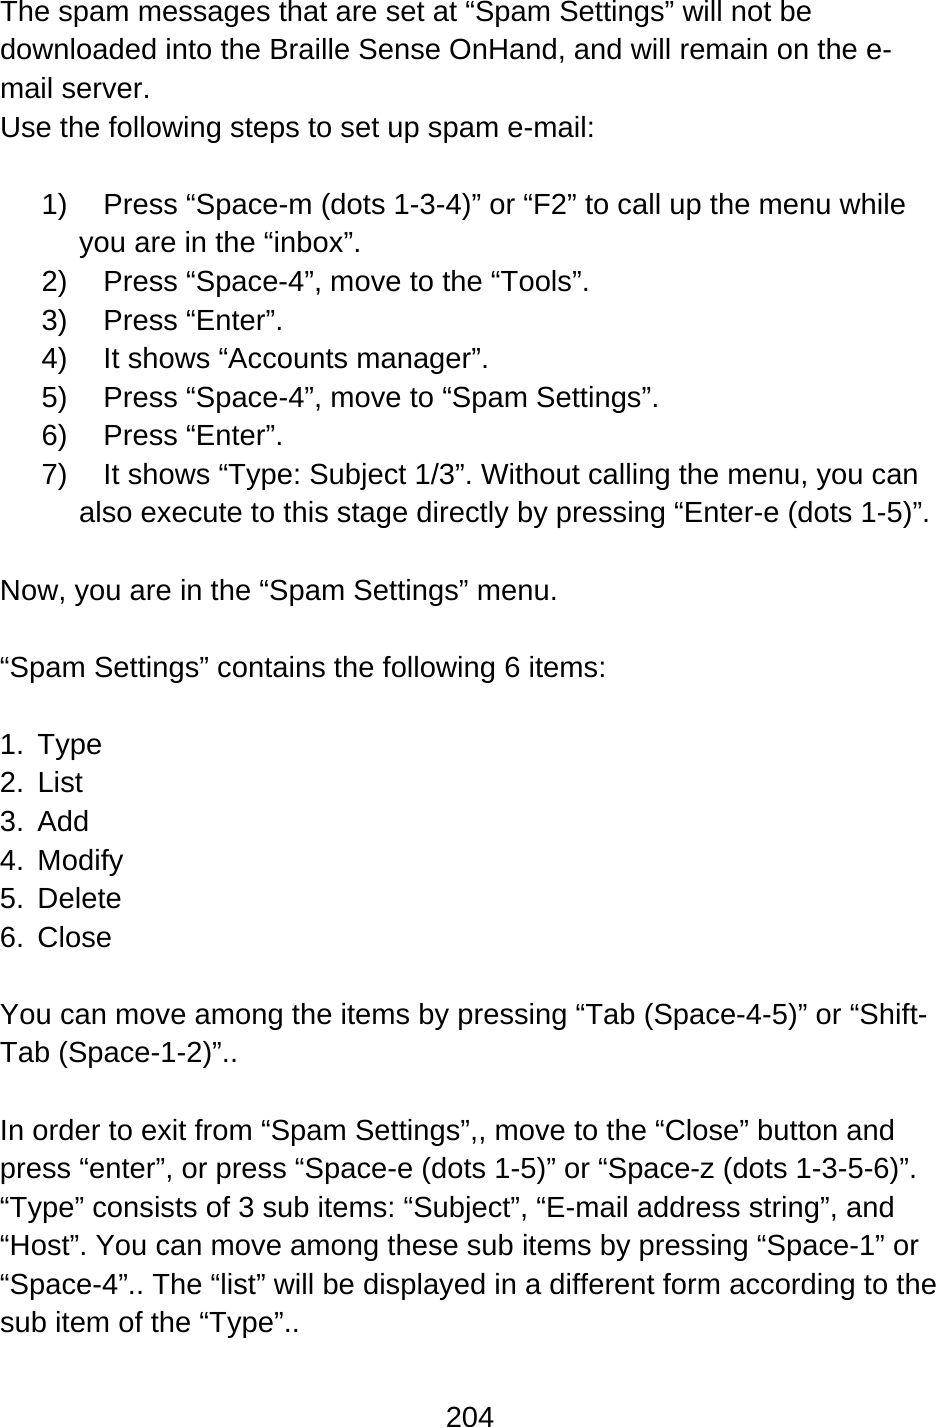 204  The spam messages that are set at “Spam Settings” will not be downloaded into the Braille Sense OnHand, and will remain on the e-mail server. Use the following steps to set up spam e-mail:  1)  Press “Space-m (dots 1-3-4)” or “F2” to call up the menu while you are in the “inbox”. 2) Press “Space-4”, move to the “Tools”. 3) Press “Enter”.  4)  It shows “Accounts manager”. 5) Press “Space-4”, move to “Spam Settings”. 6) Press “Enter”.  7)  It shows “Type: Subject 1/3”. Without calling the menu, you can also execute to this stage directly by pressing “Enter-e (dots 1-5)”.  Now, you are in the “Spam Settings” menu.  “Spam Settings” contains the following 6 items:  1. Type 2. List 3. Add 4. Modify 5. Delete 6. Close  You can move among the items by pressing “Tab (Space-4-5)” or “Shift-Tab (Space-1-2)”..    In order to exit from “Spam Settings”,, move to the “Close” button and press “enter”, or press “Space-e (dots 1-5)” or “Space-z (dots 1-3-5-6)”. “Type” consists of 3 sub items: “Subject”, “E-mail address string”, and “Host”. You can move among these sub items by pressing “Space-1” or “Space-4”.. The “list” will be displayed in a different form according to the sub item of the “Type”..  